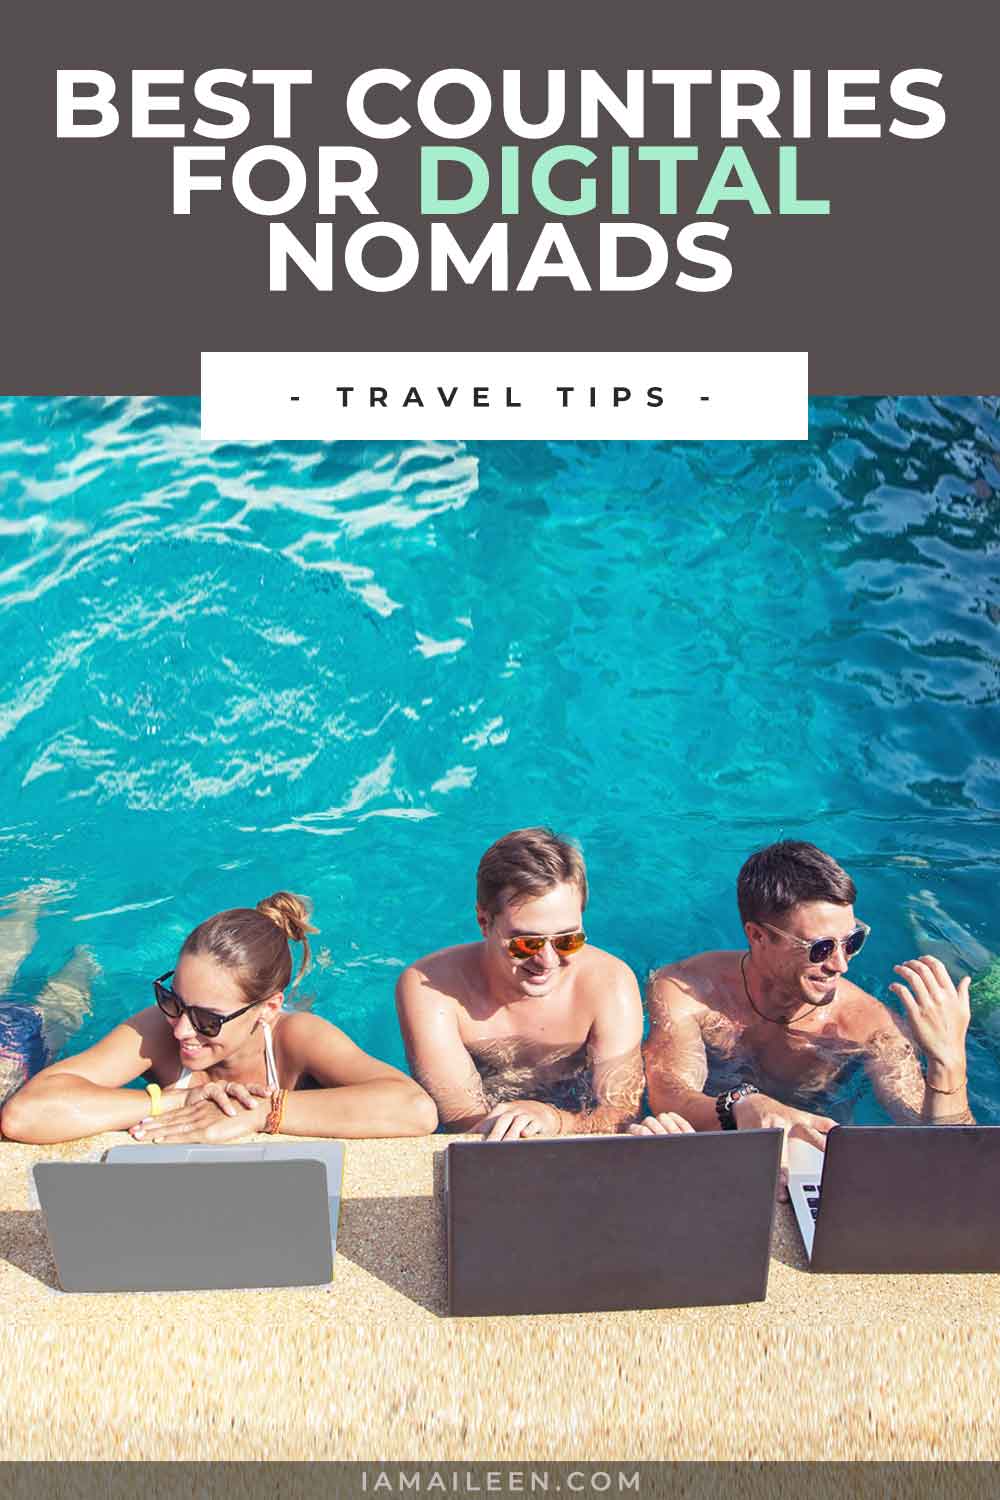 Best Countries for Digital Nomads